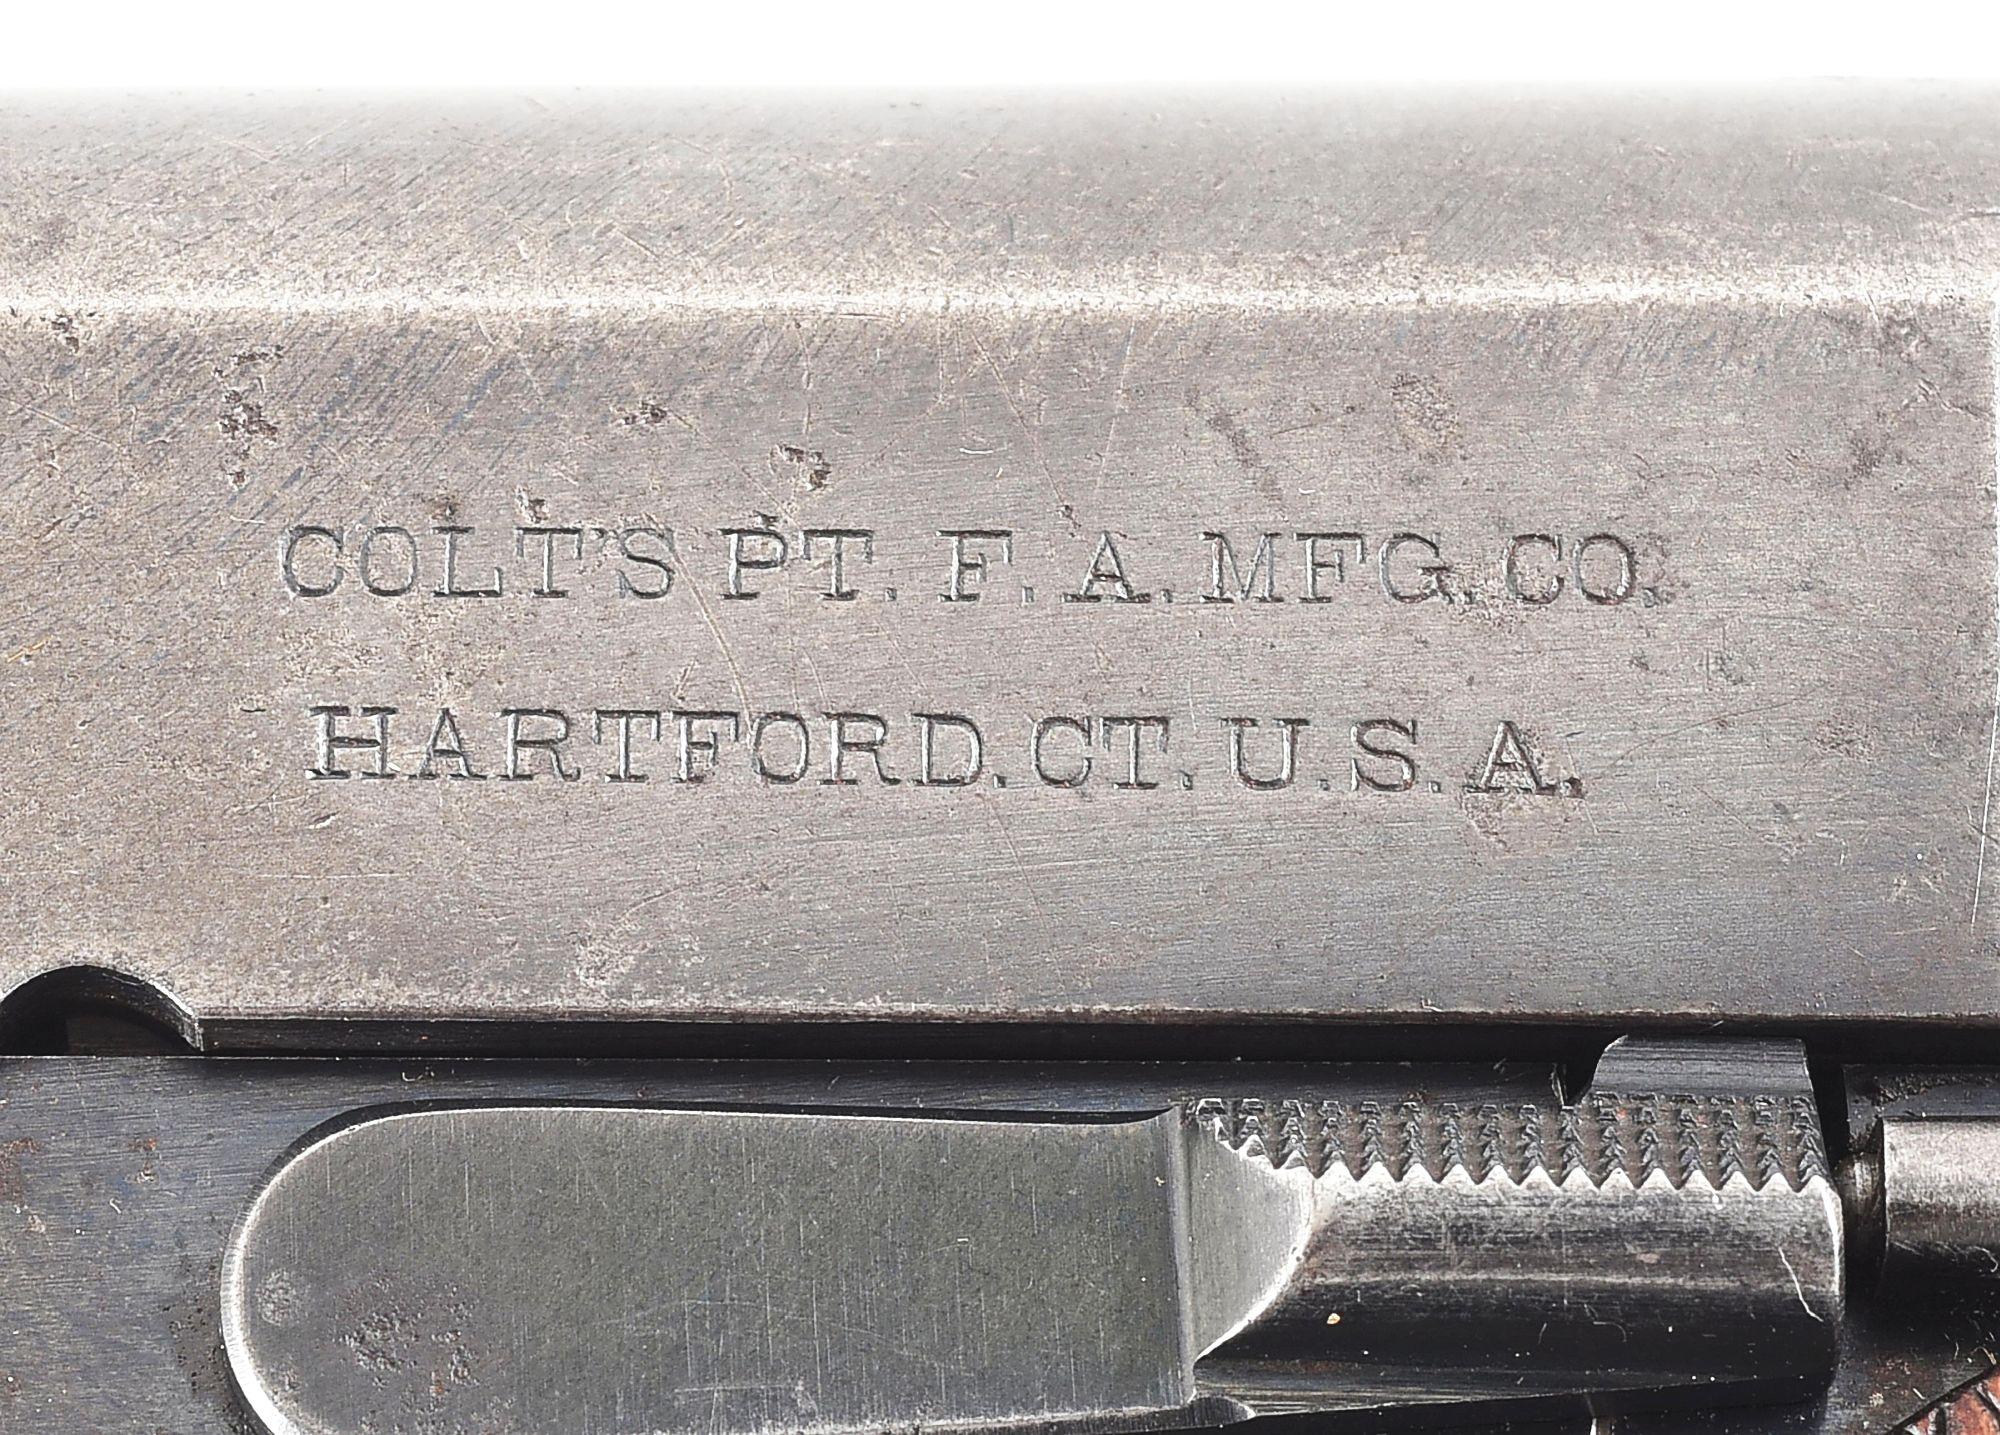 (C) A VERY RARE AND EARLY COLT 1911 .45 ACP SEMI-AUTOMATIC PISTOL FROM A NAVY SHIPMENT WITH A DESIRA